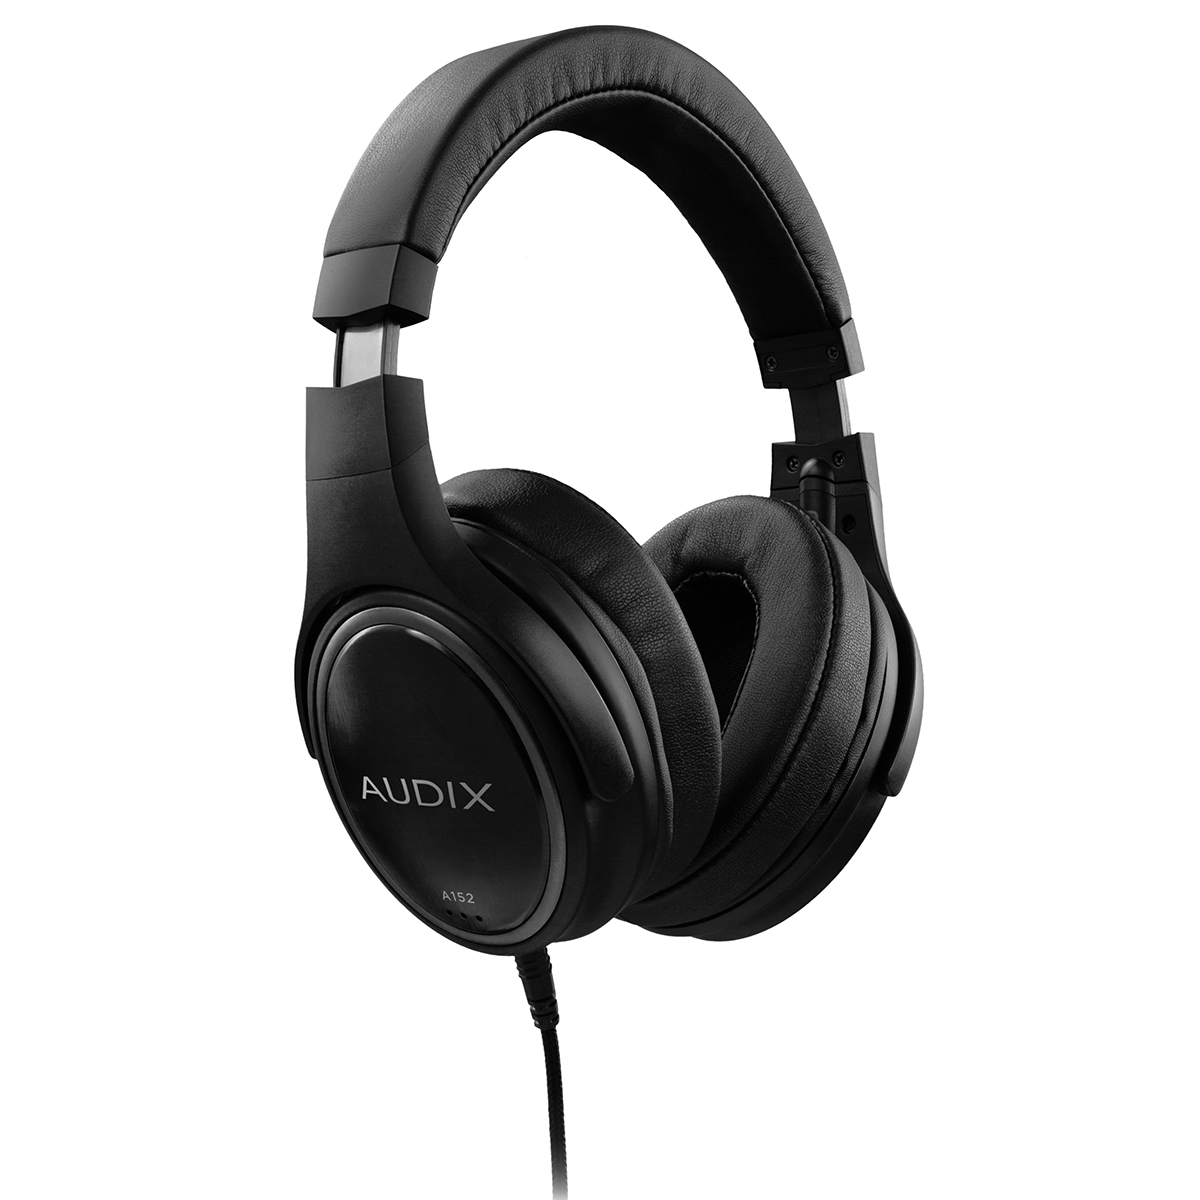 Auriculares profesionales Audix A152